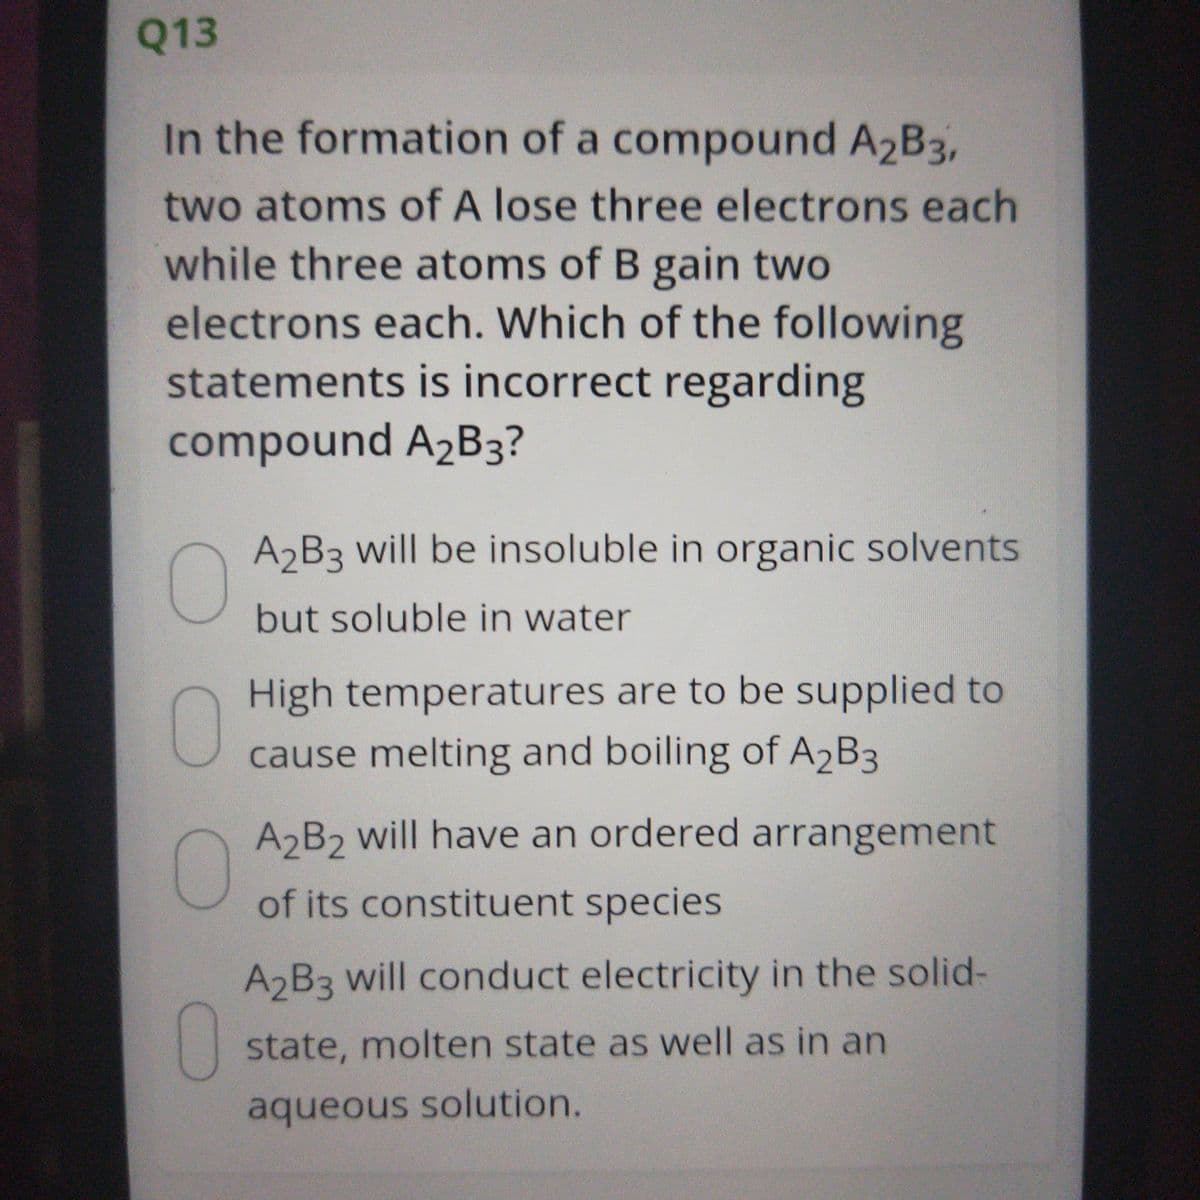 Q13
In the formation of a compound A2B3,
two atoms of A lose three electrons each
while three atoms of B gain two
electrons each. Which of the following
statements is incorrect regarding
compound A2B3?
A2B3 will be insoluble in organic solvents
but soluble in water
0
High temperatures are to be supplied to
cause melting and boiling of A2B3
A2B2 will have an ordered arrangement
of its constituent species
A2B3 will conduct electricity in the solid-
0
state, molten state as well as in an
aqueous solution.
